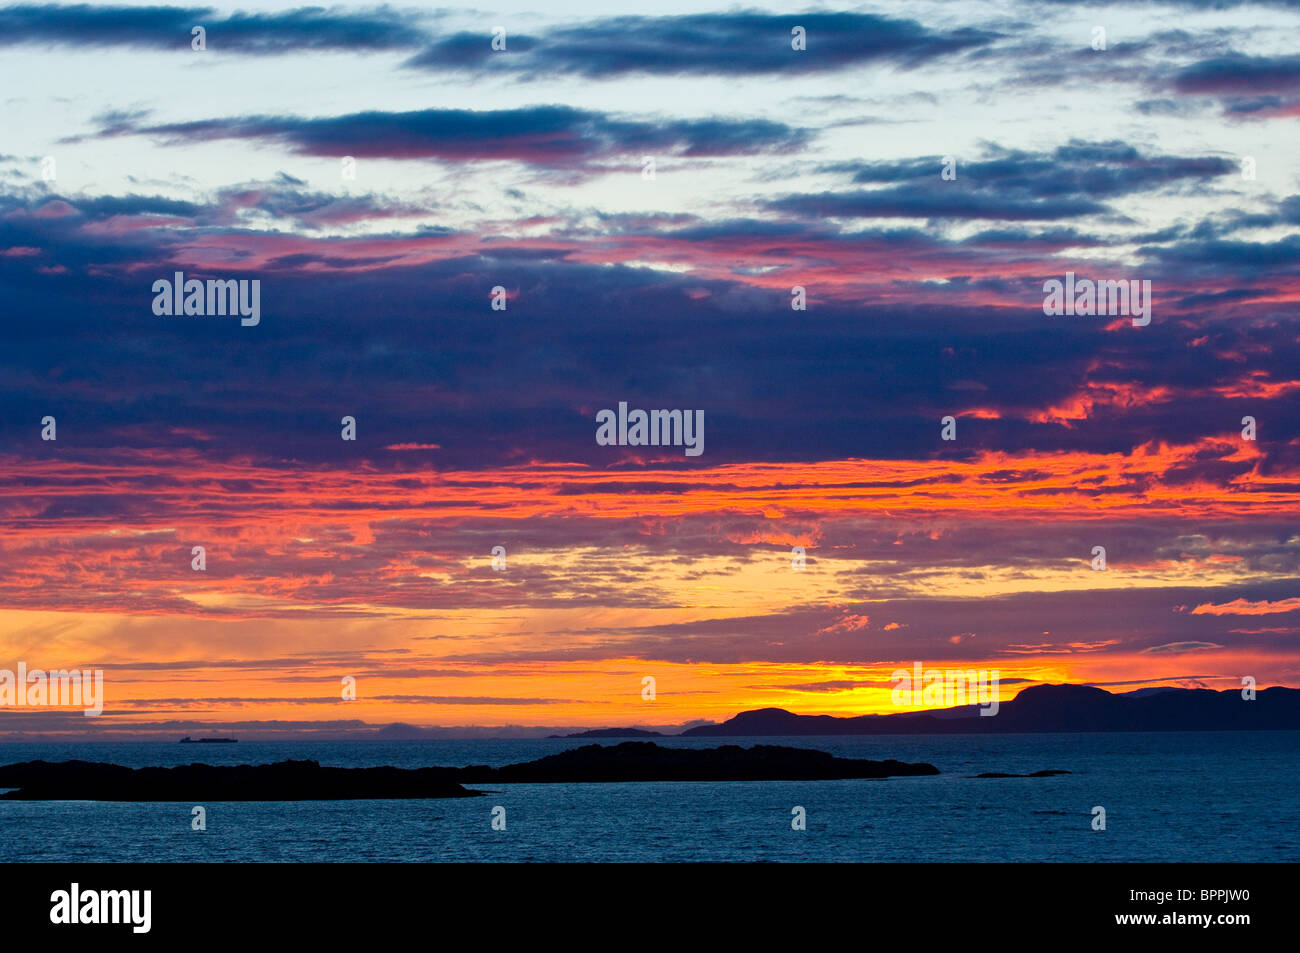 Sunset over the Isle of Rum and Isle of Skye from, Arisaig, Scotland Stock Photo